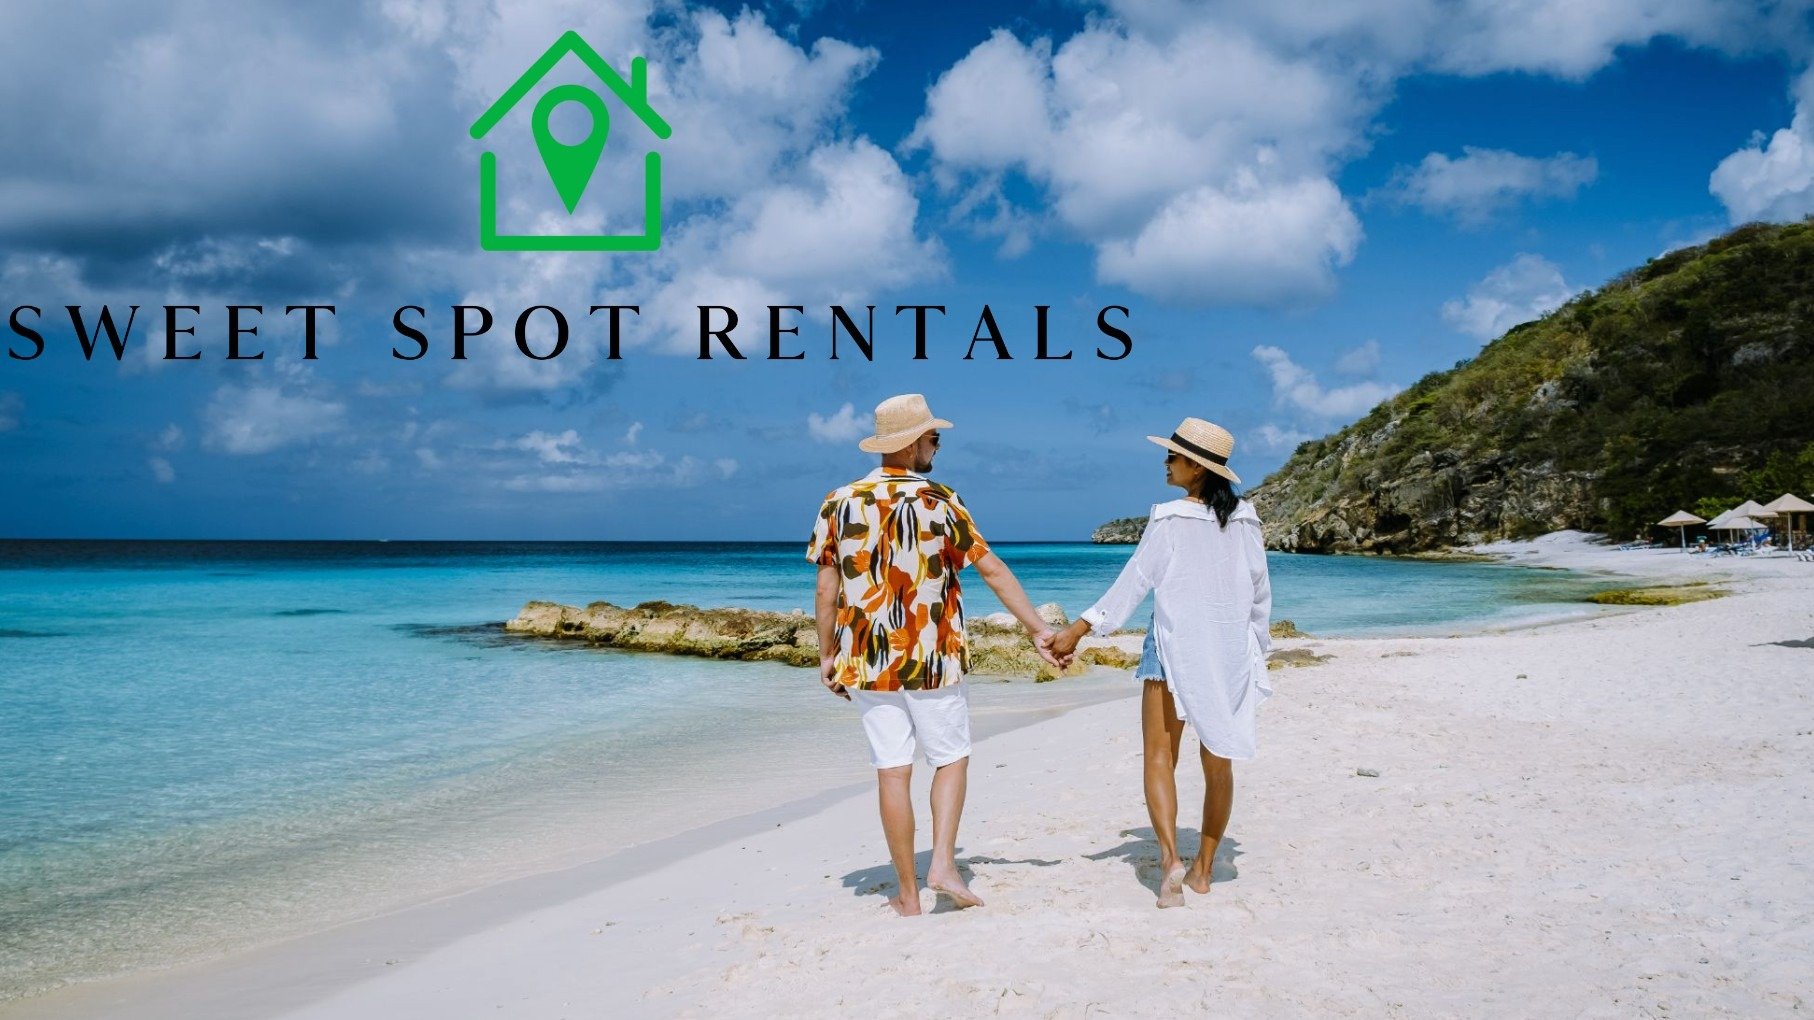 Sweet Spot Rentals Vacation Rental Manager Launches with over 1,000 Global Units